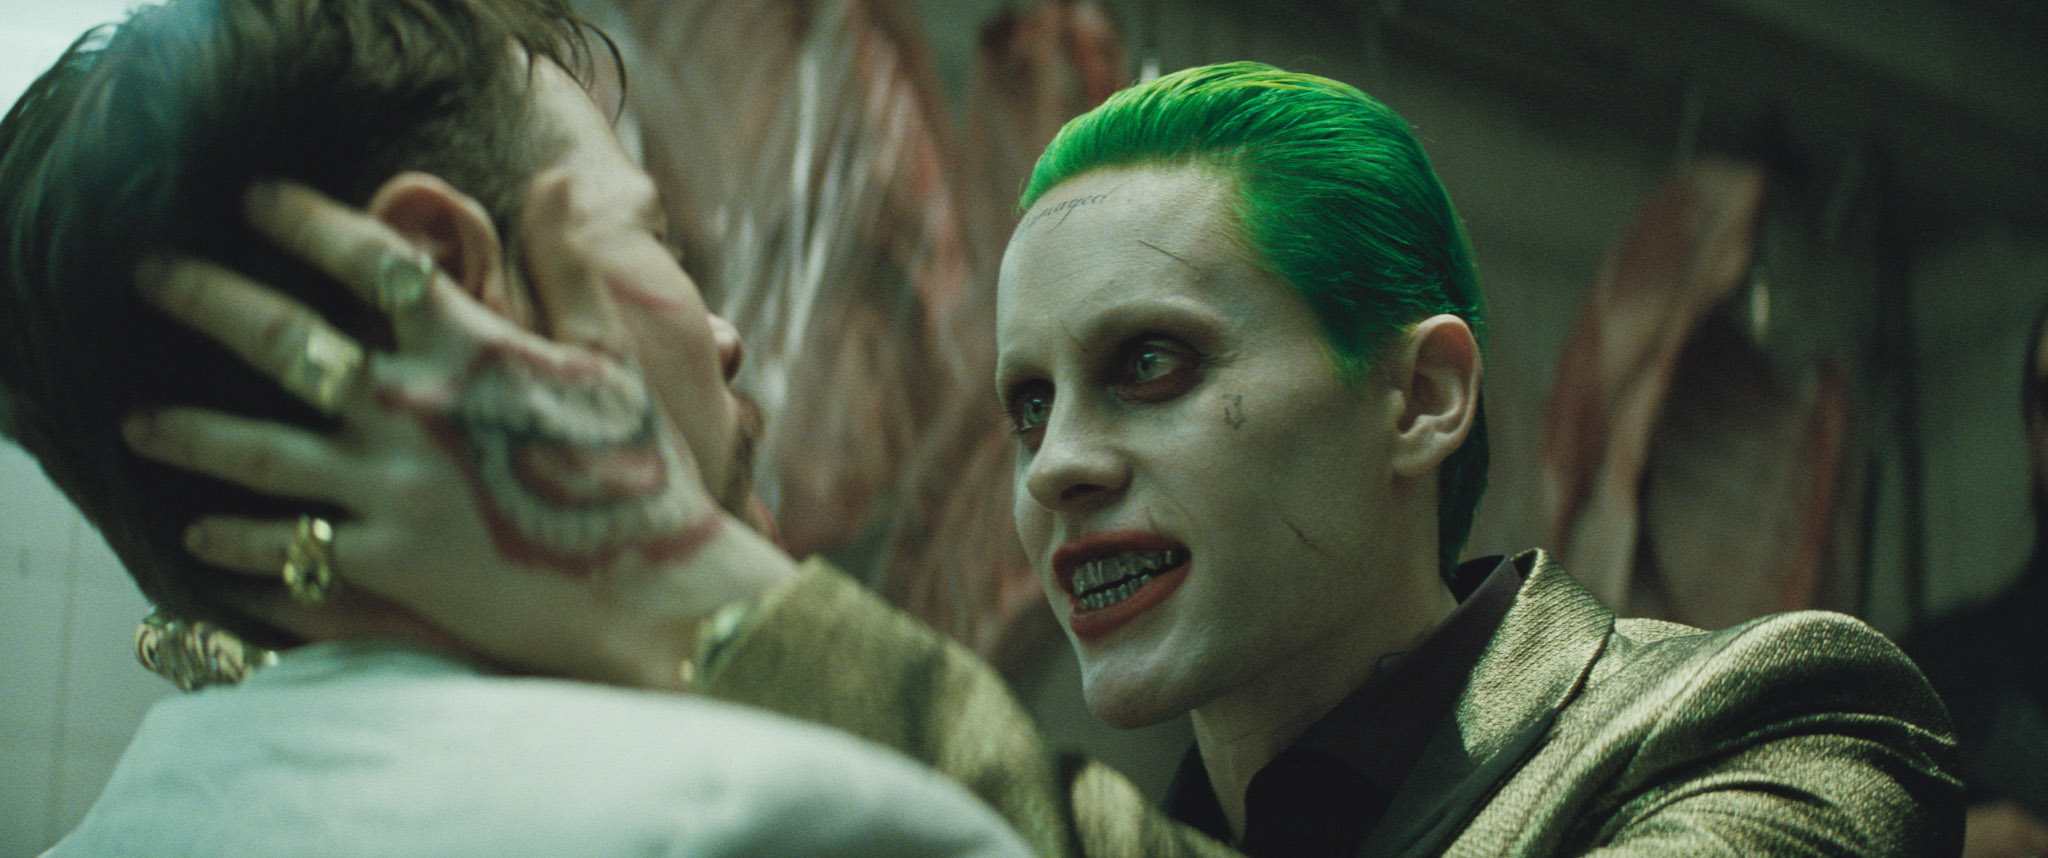 Jared Leto says Suicide Squad is just the beginning for the Joker TheFuss.co.uk